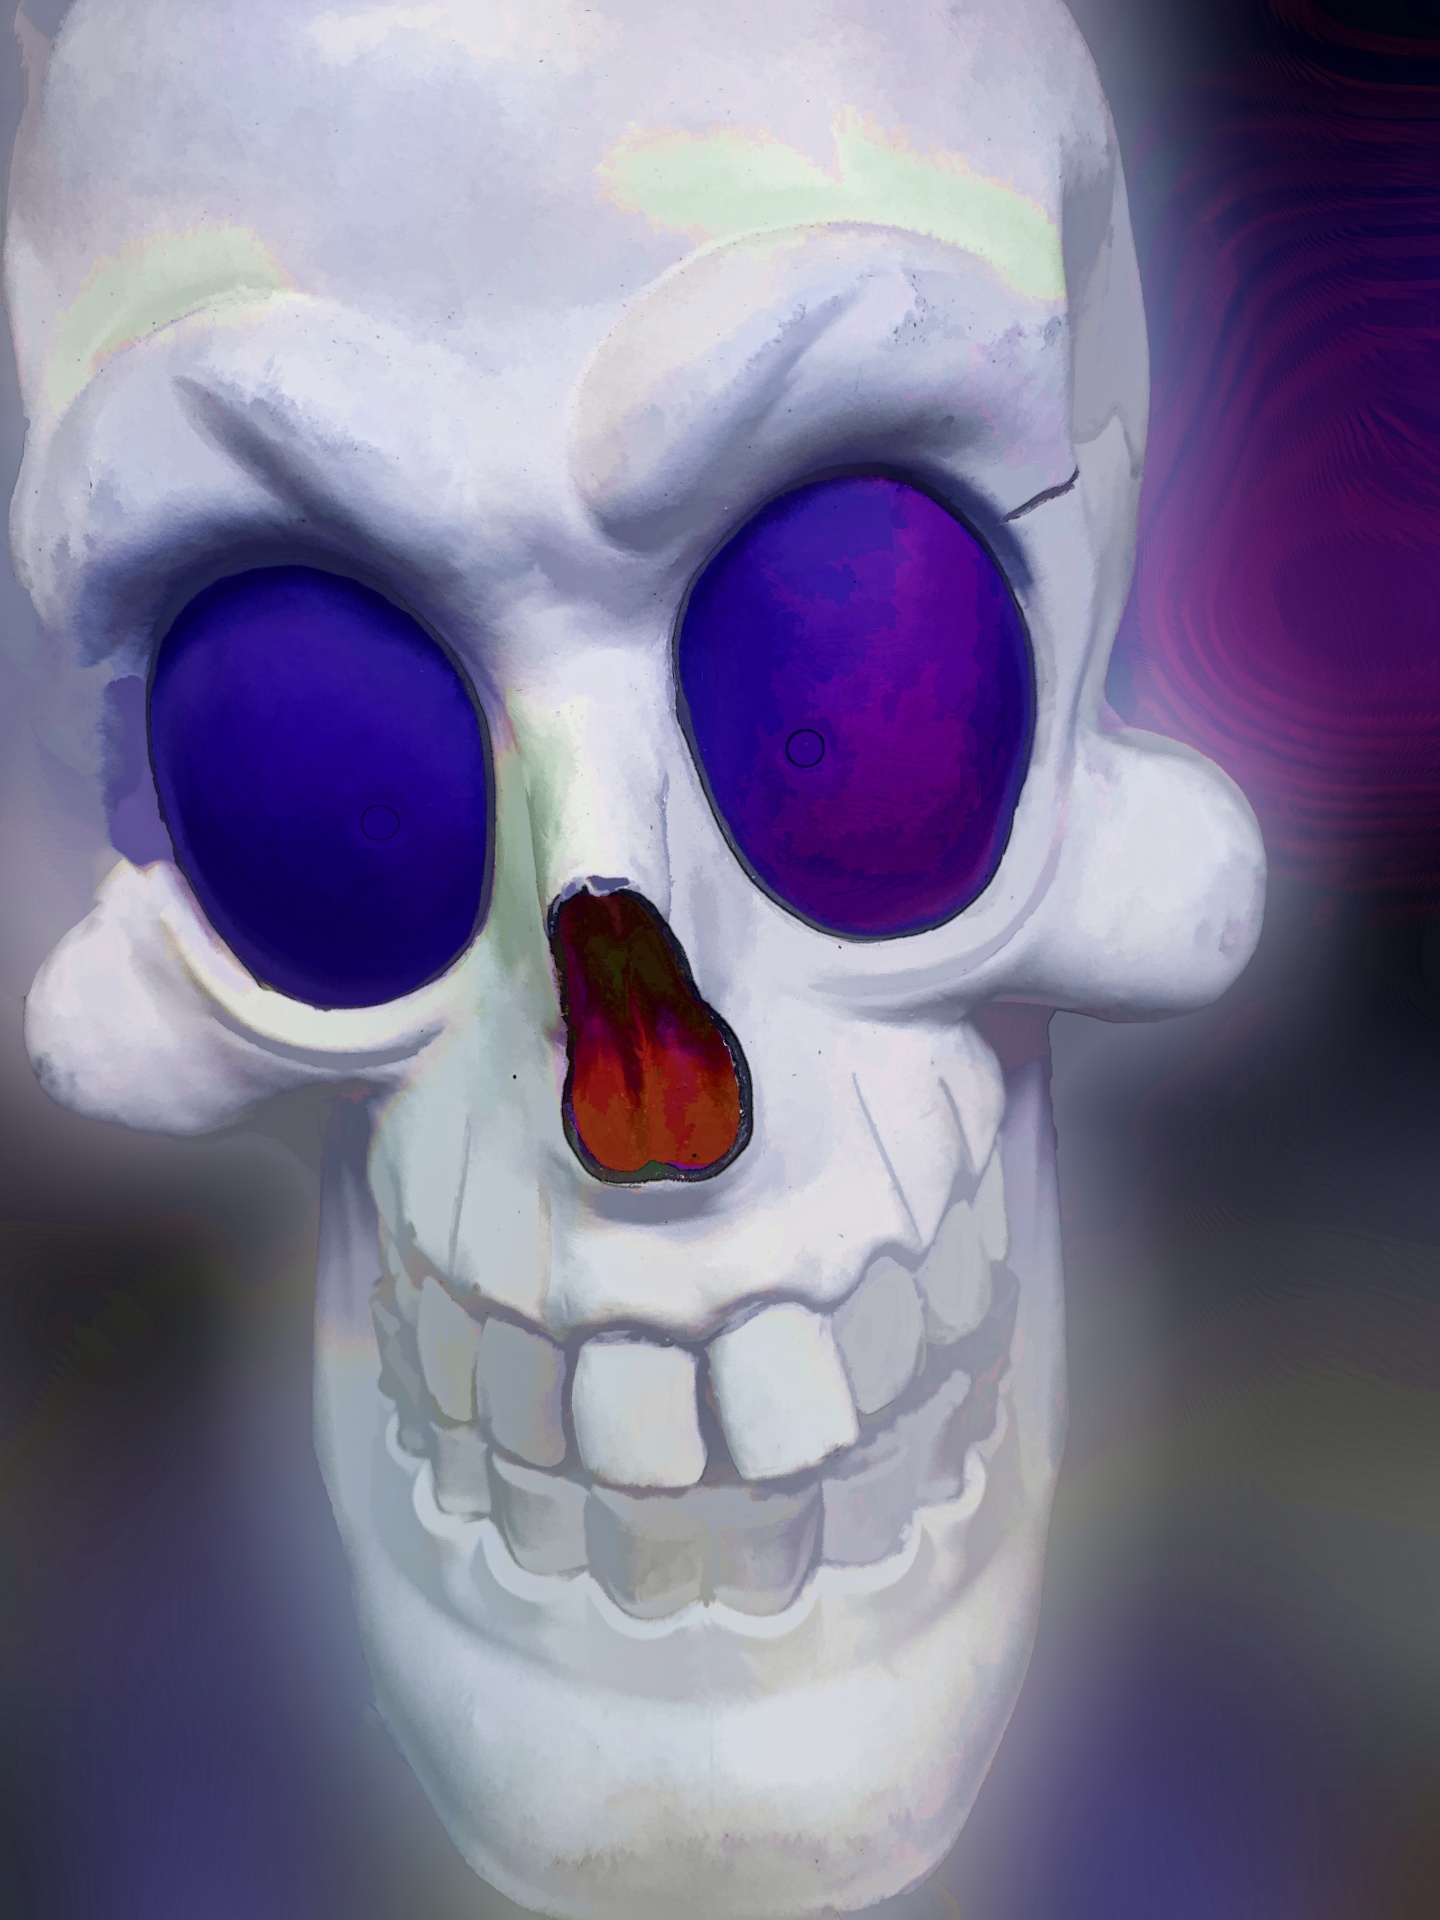 creepy skull head with purple eye sockets and red nose